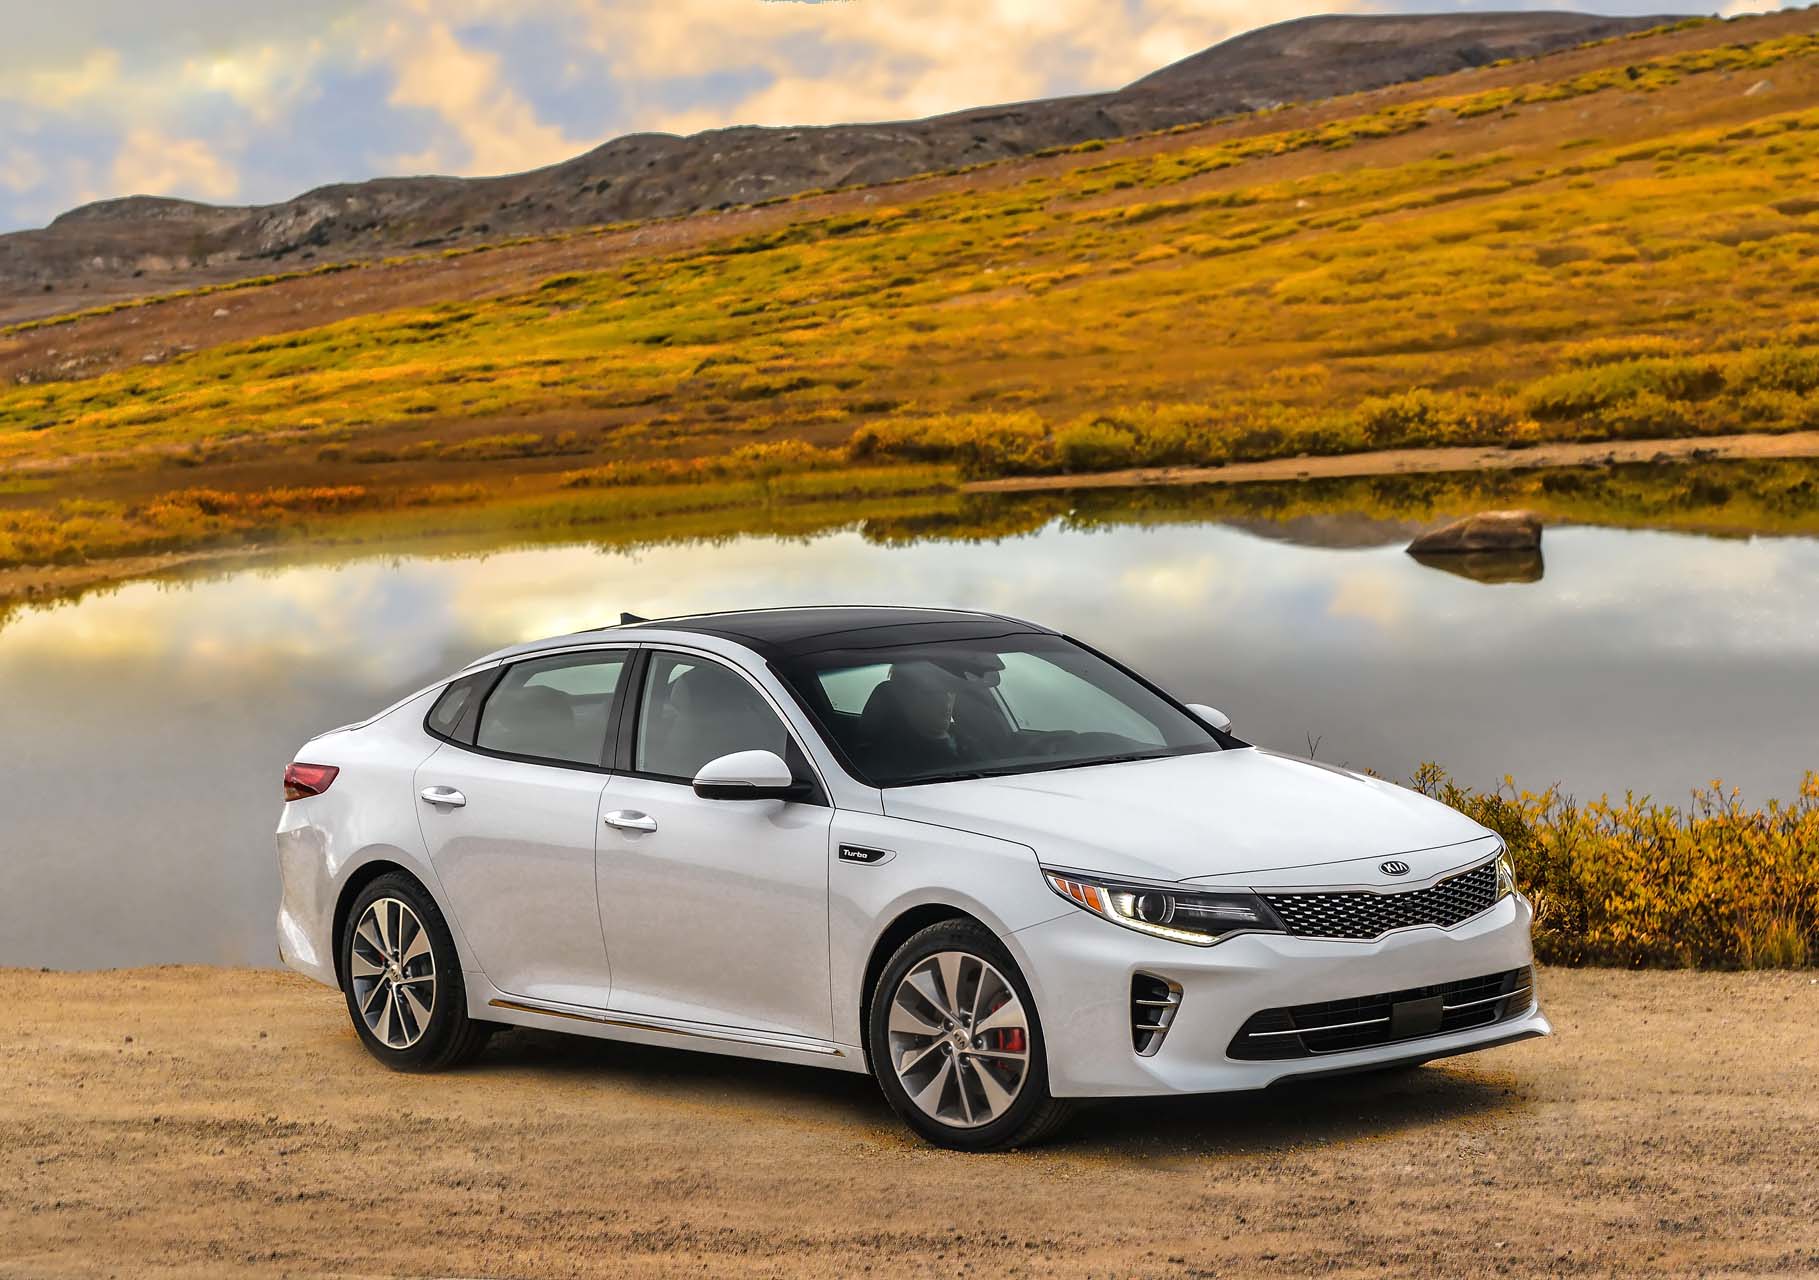 2018 Kia Optima Review, Ratings, Specs, Prices, and Photos - The Car Connection